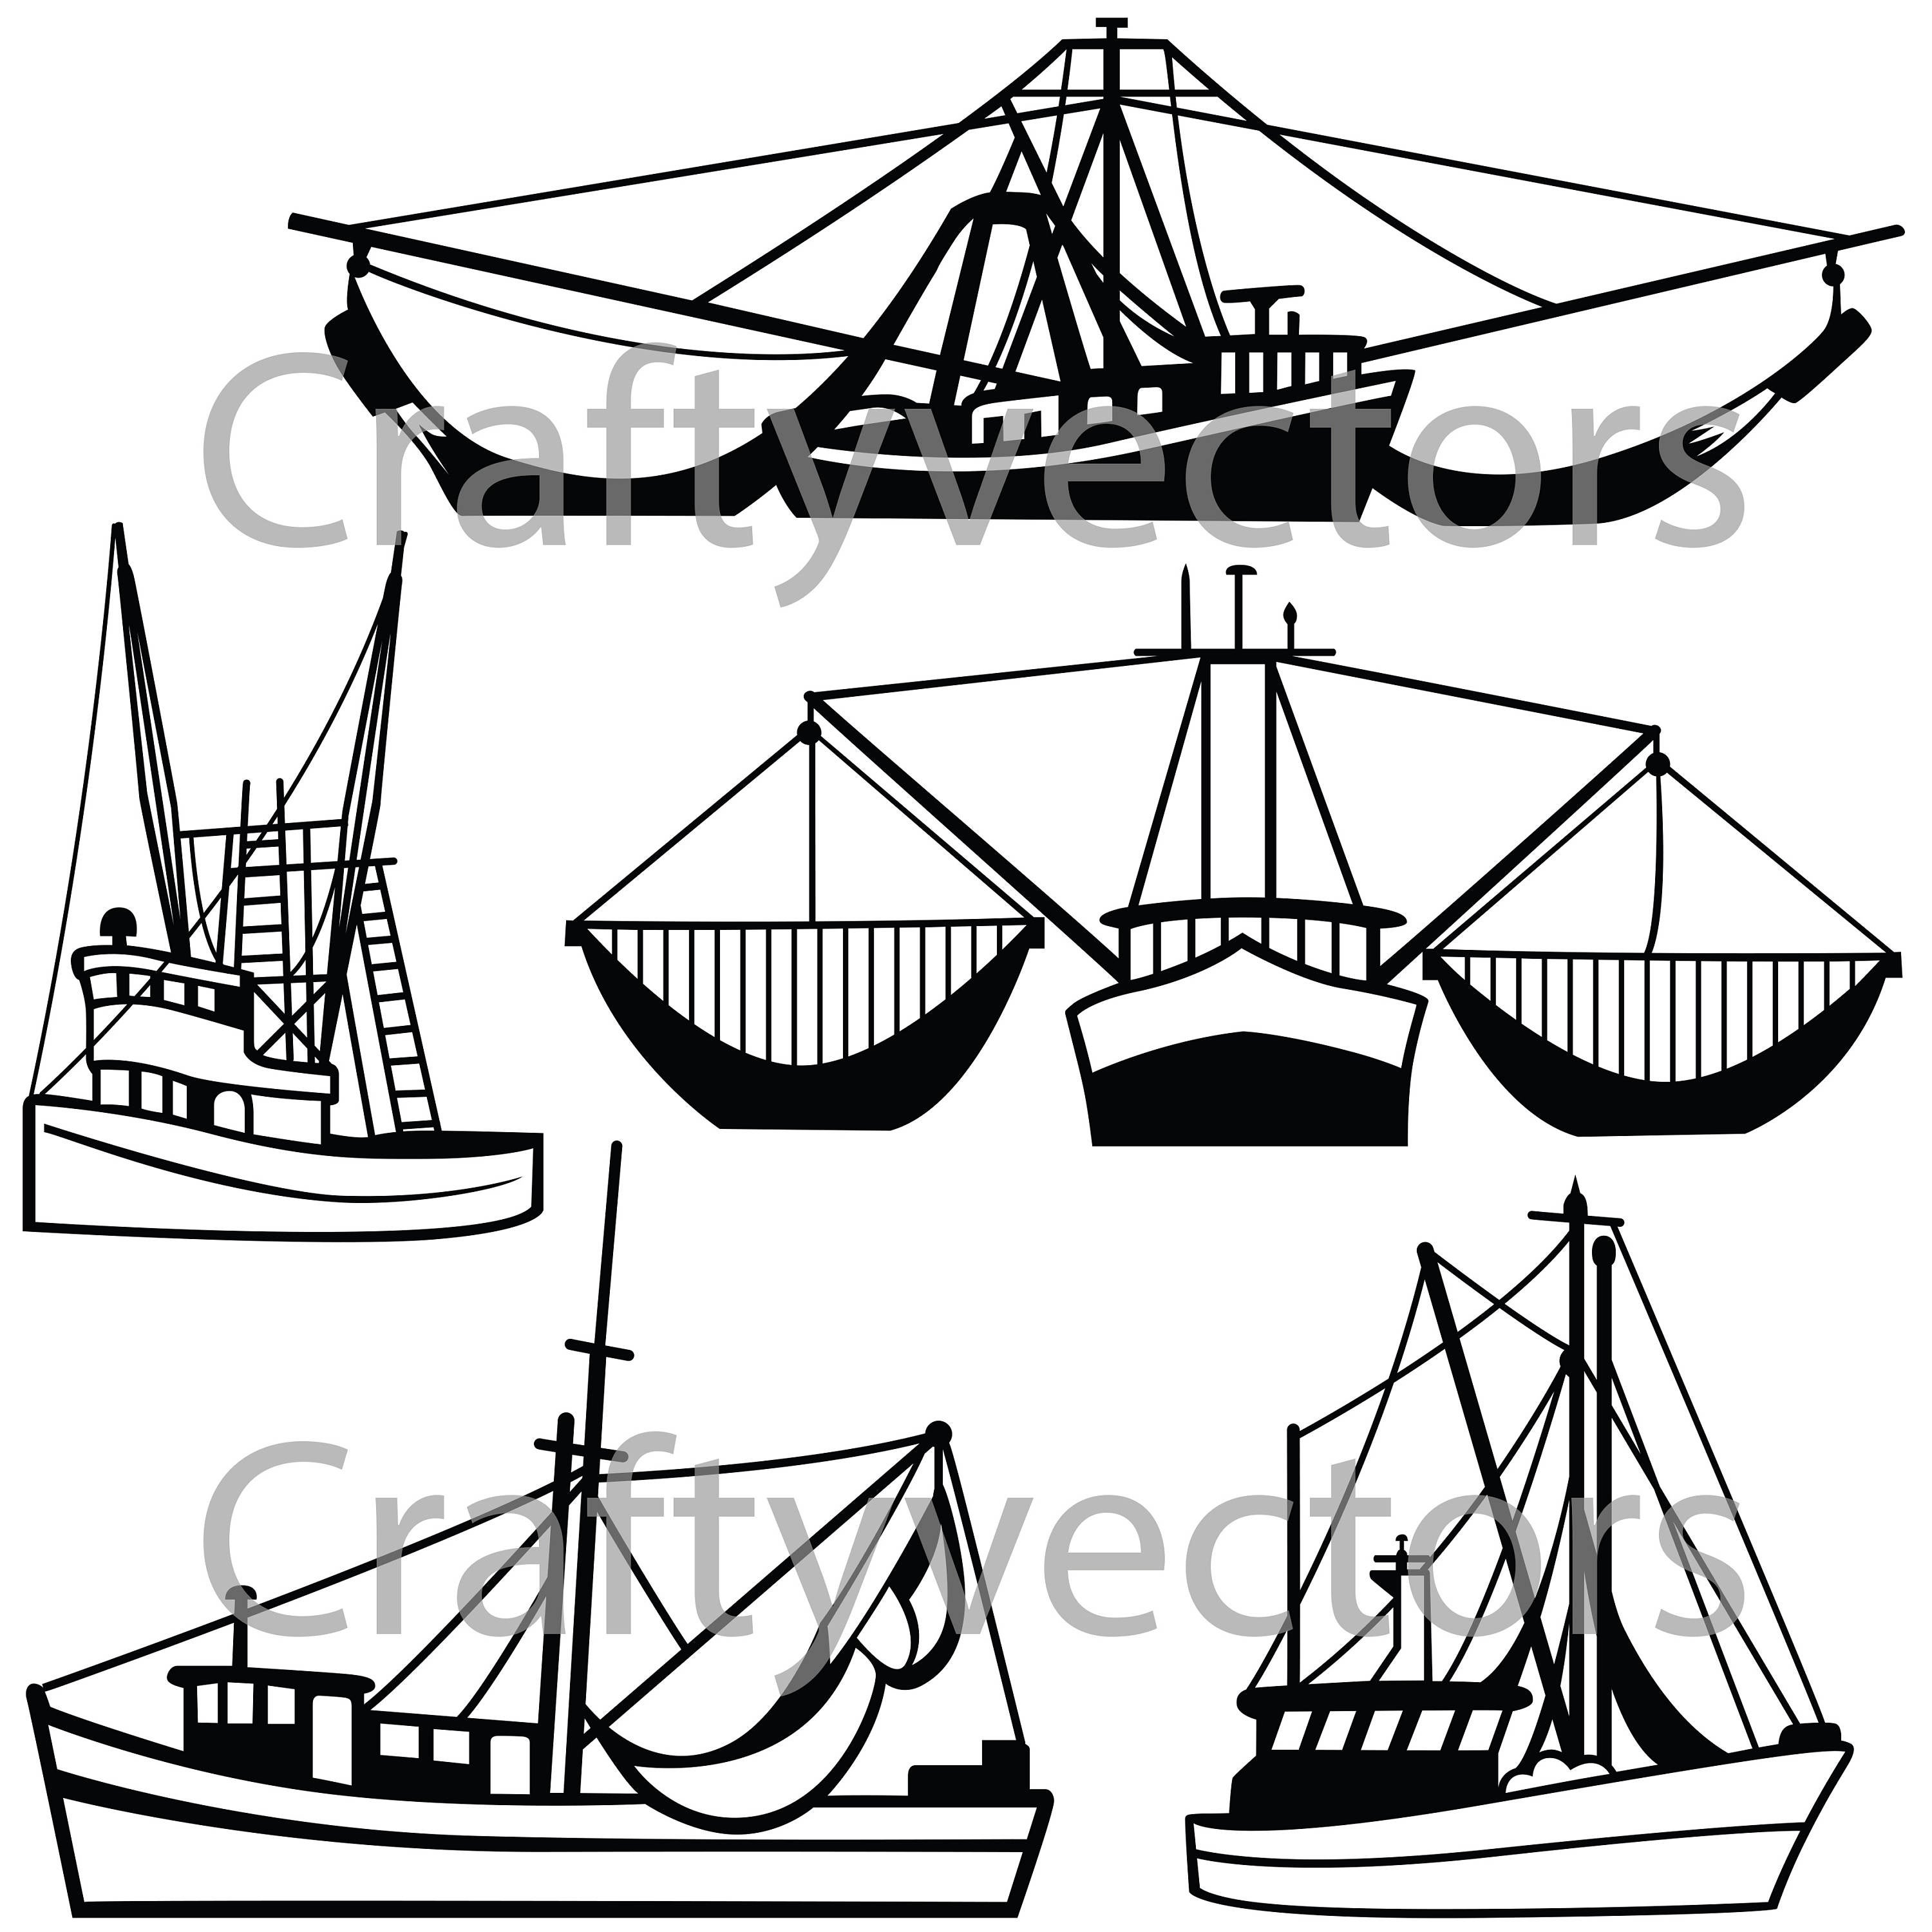 Download Shrimp Boat Vector at Vectorified.com | Collection of ...